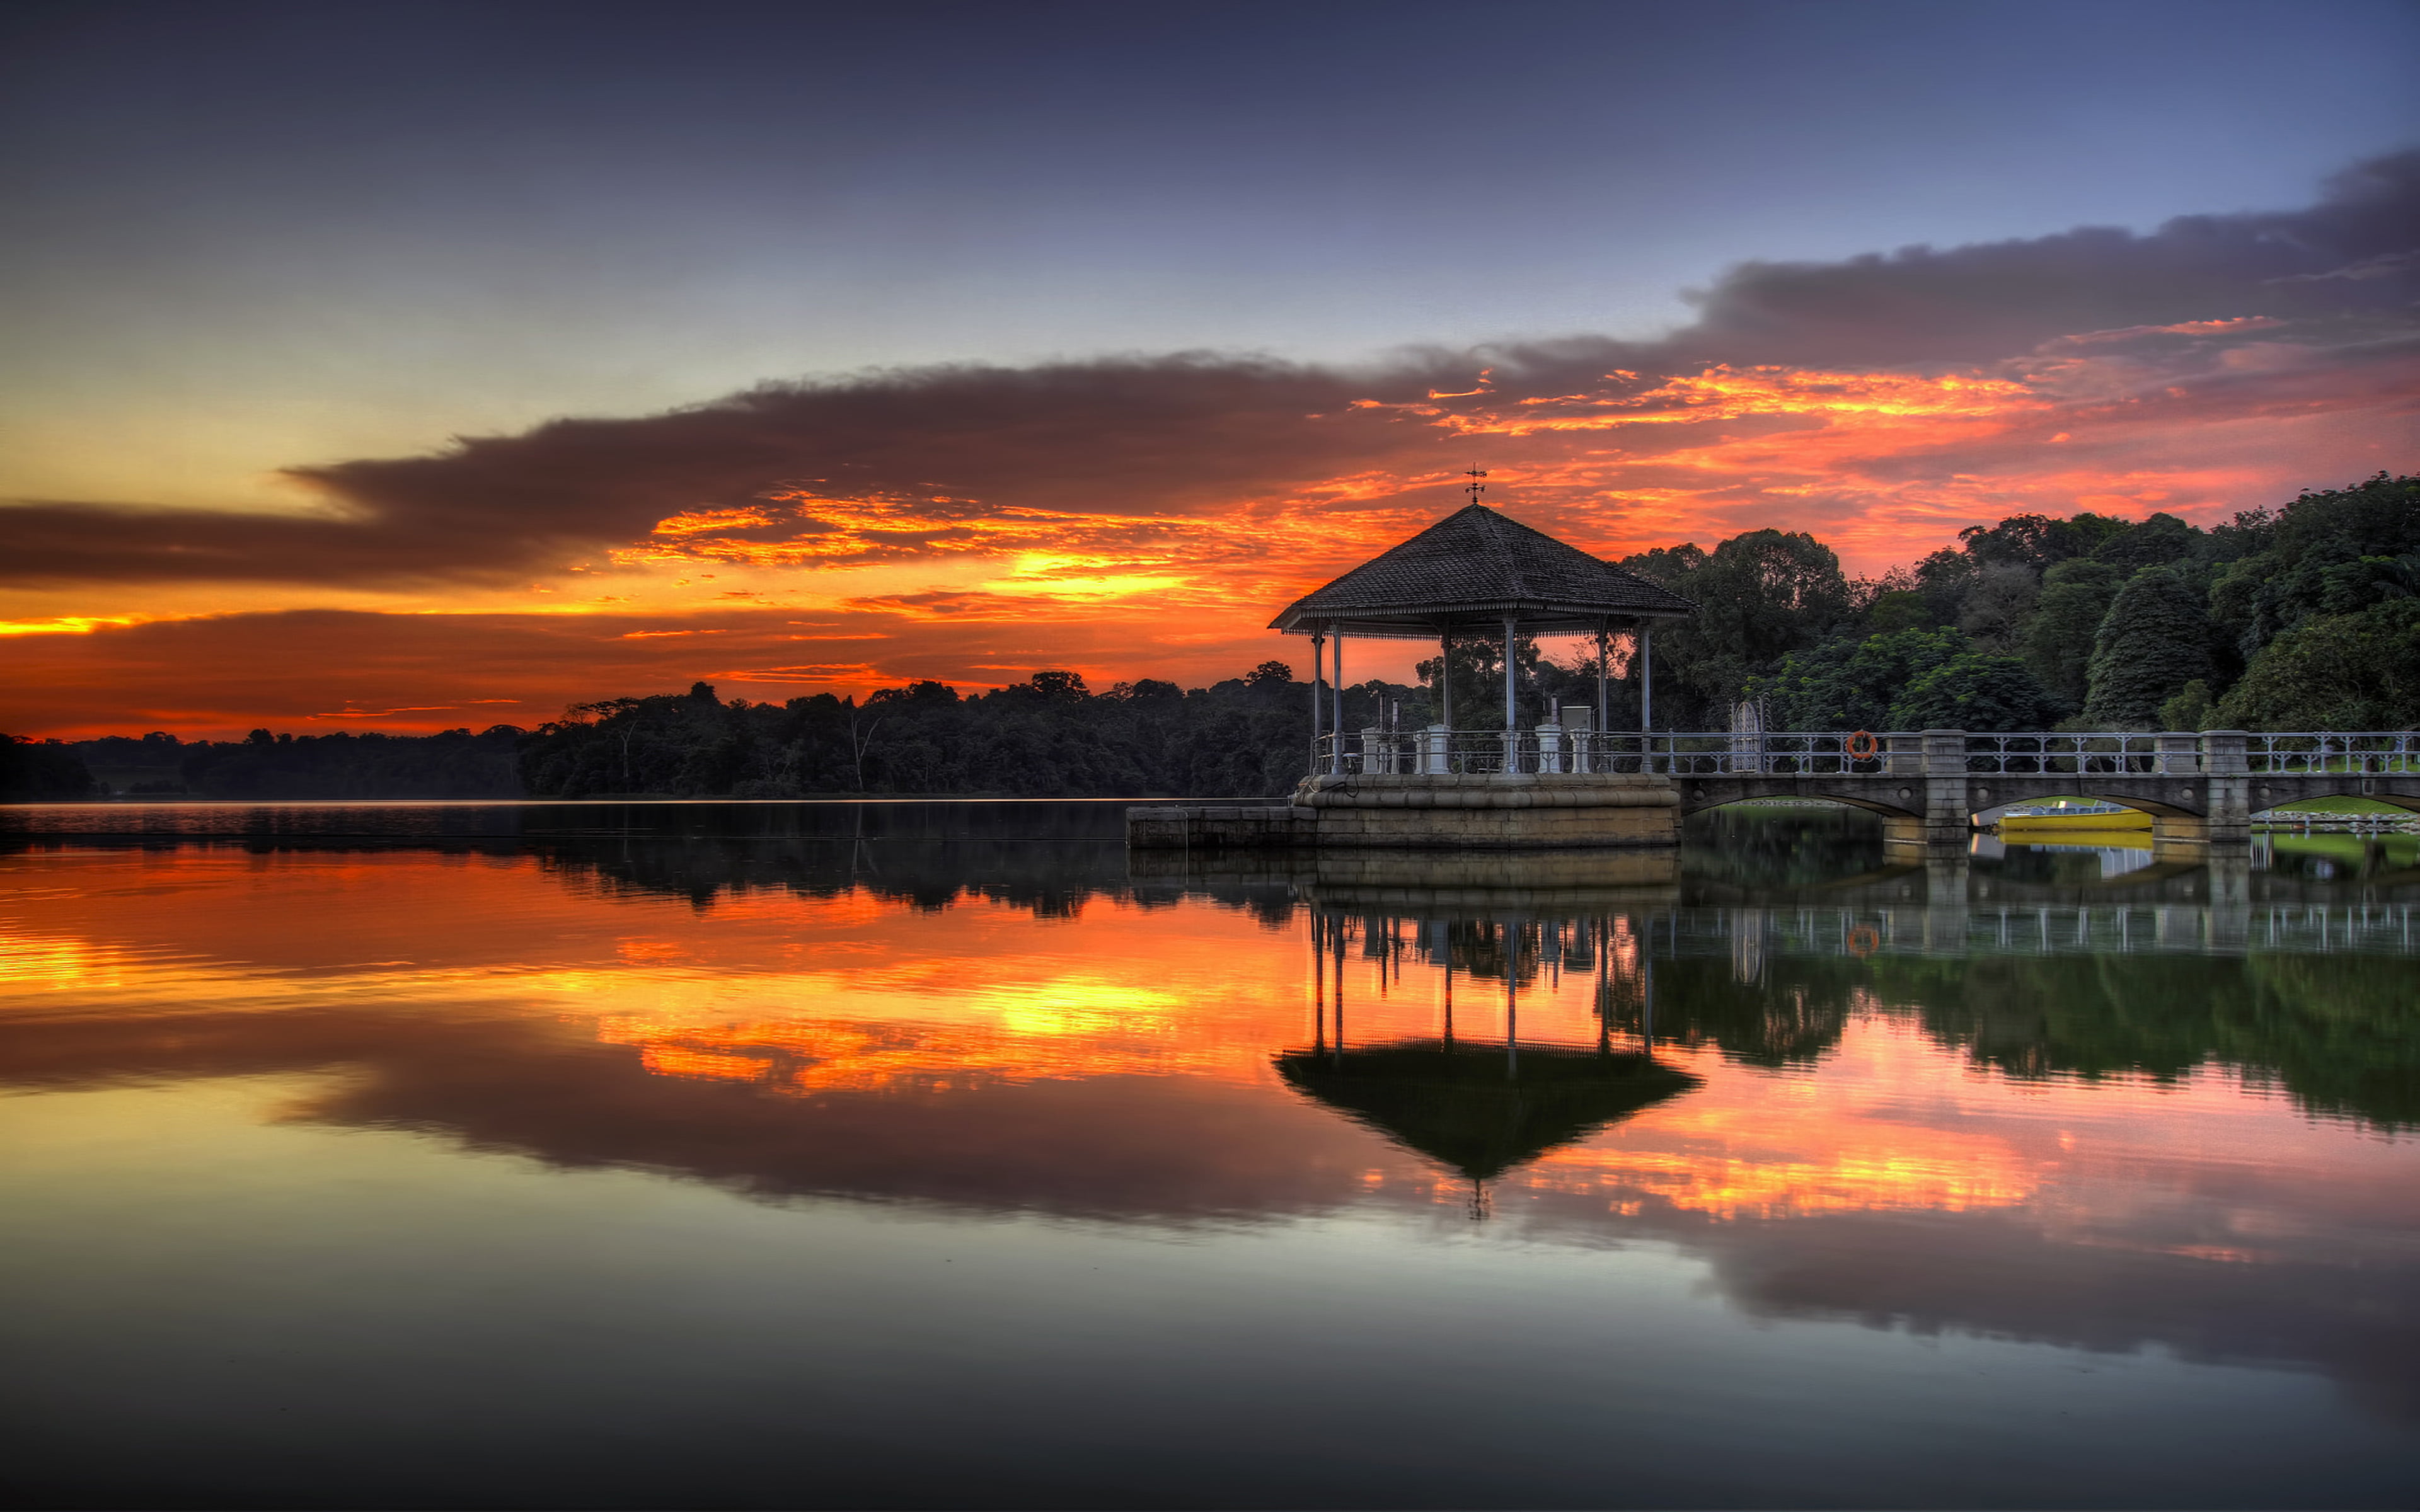 Reflection Of Sunset Lower Peirce Reservoir Lake In Singapore Desktop Hd Wallpapers For Mobile Phones And Computer 3840×2400